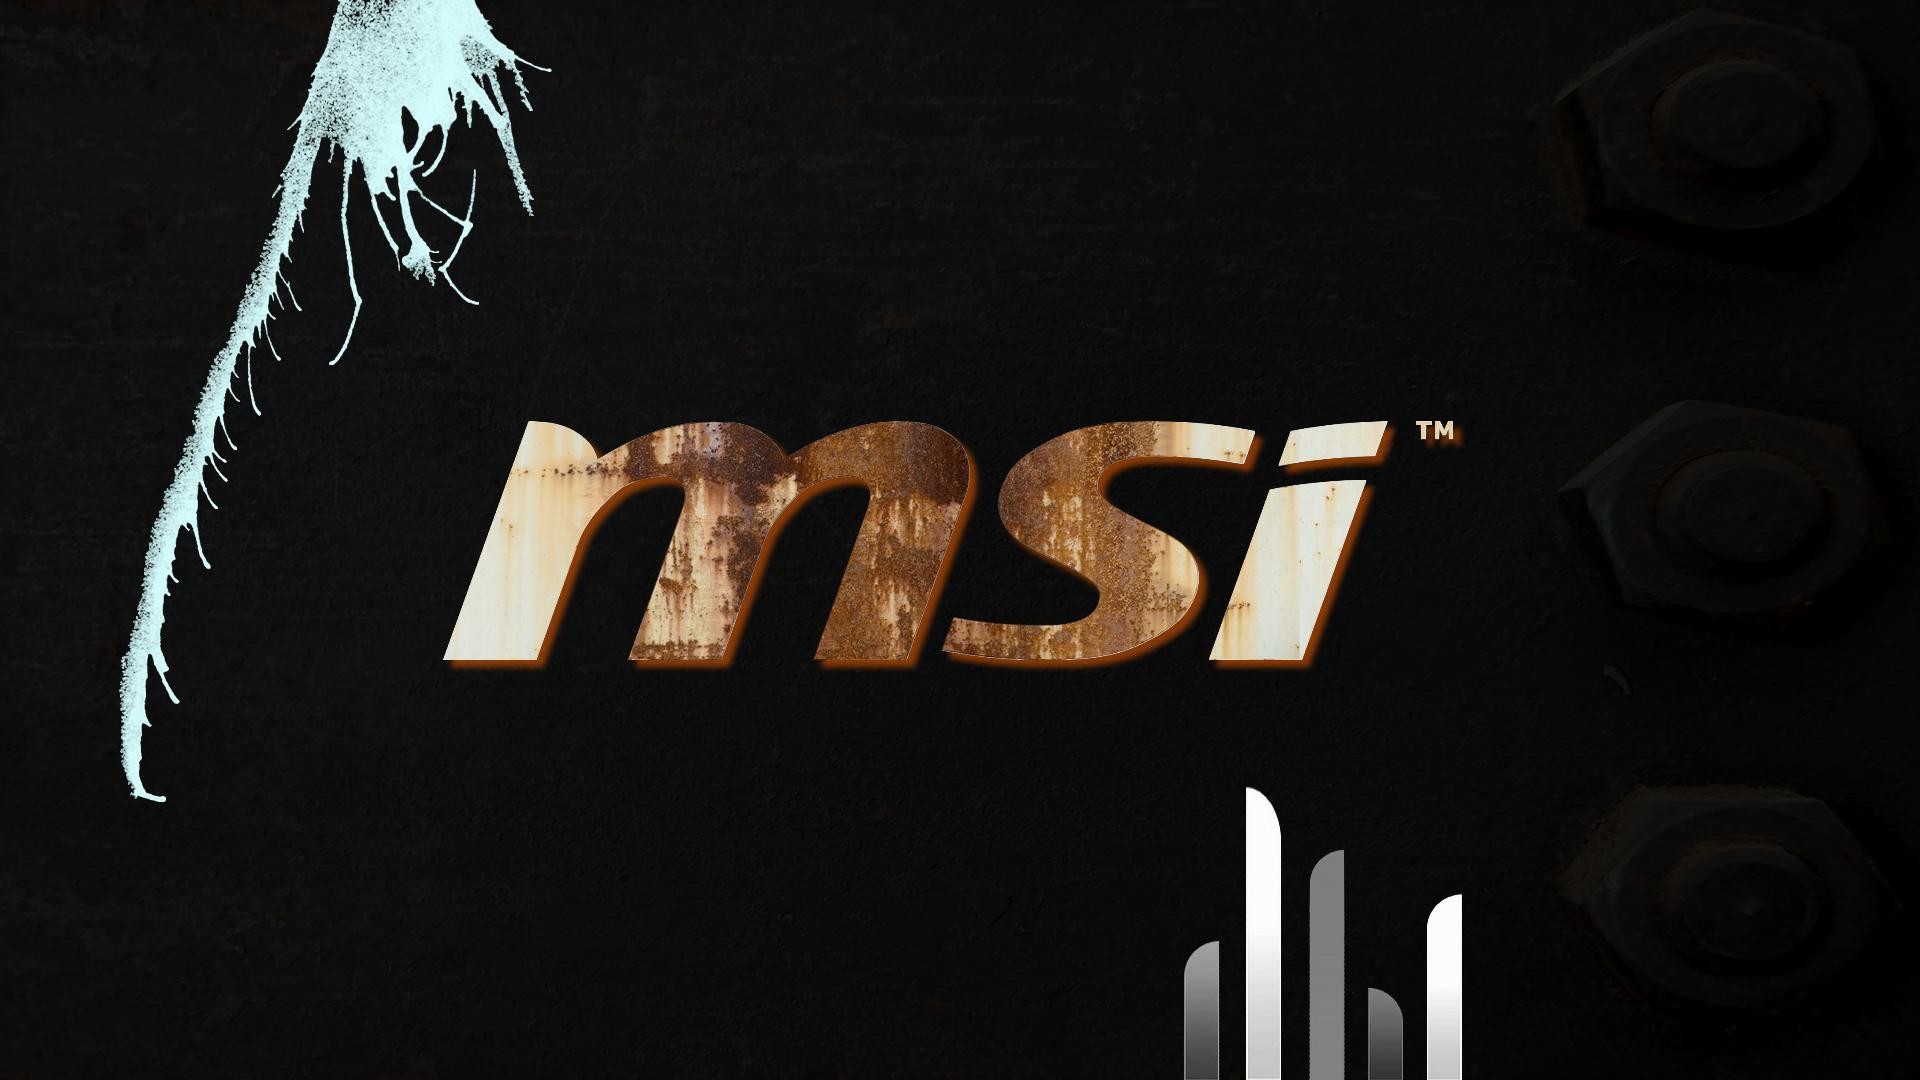 1920x1080 wallpaper.wiki-Msi-Text-Background-Download-Free-PIC-